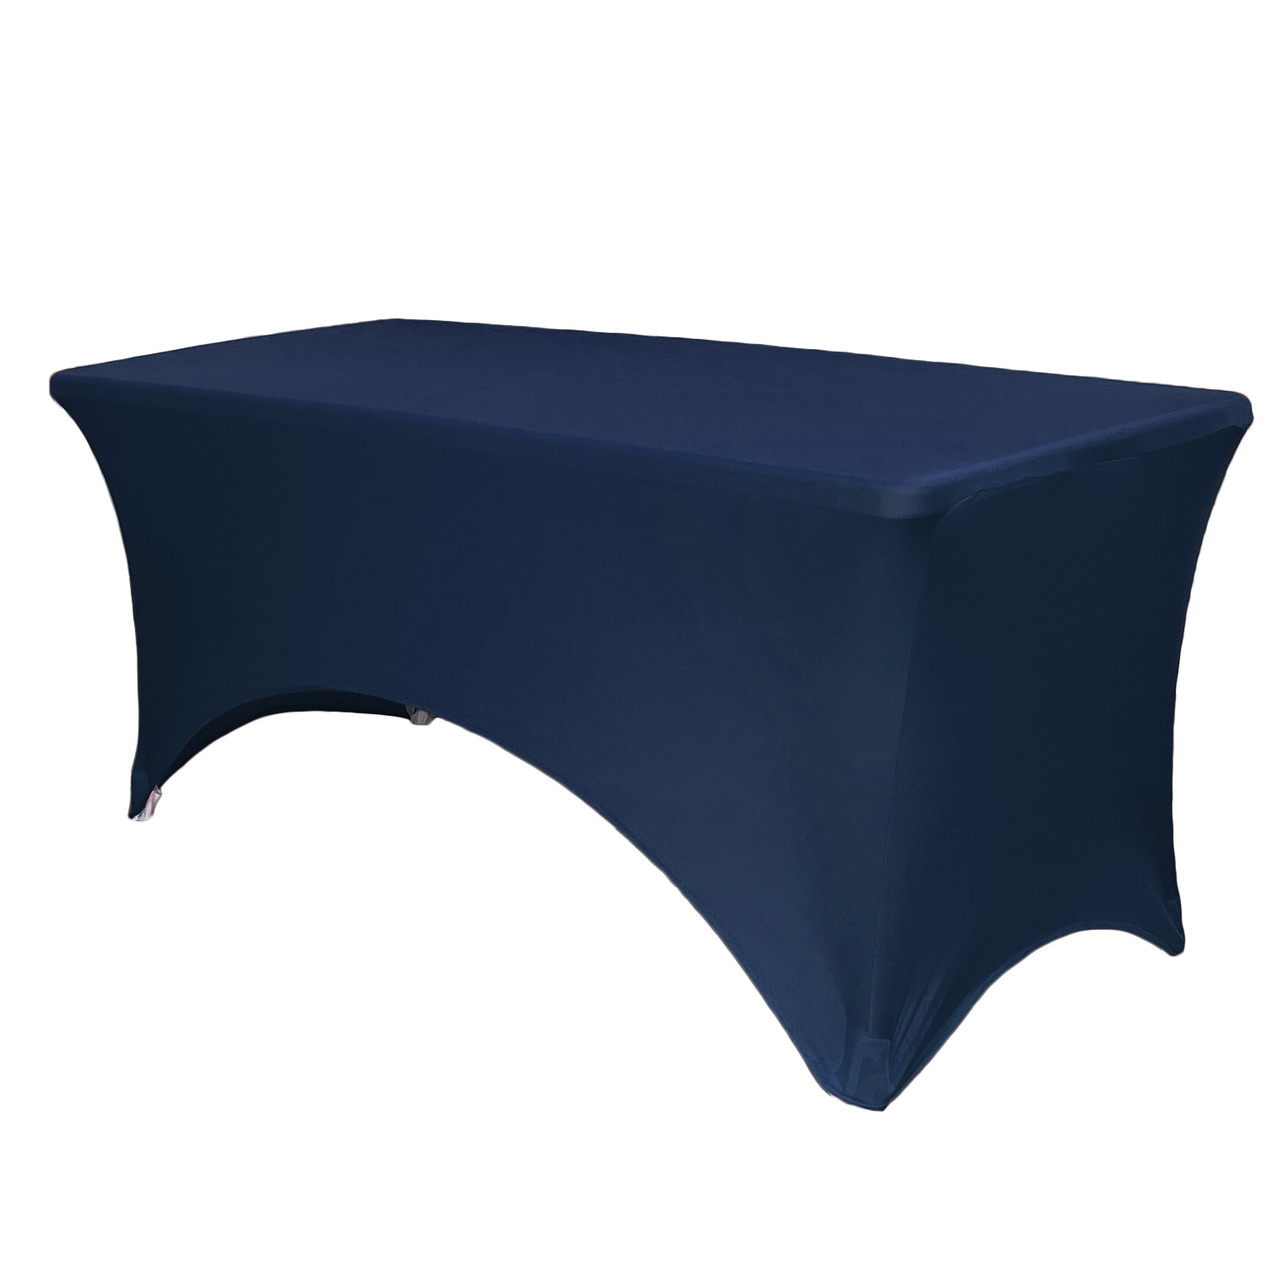 Stretch Spandex 6 ft Rectangular Table Cover Navy Blue - Your